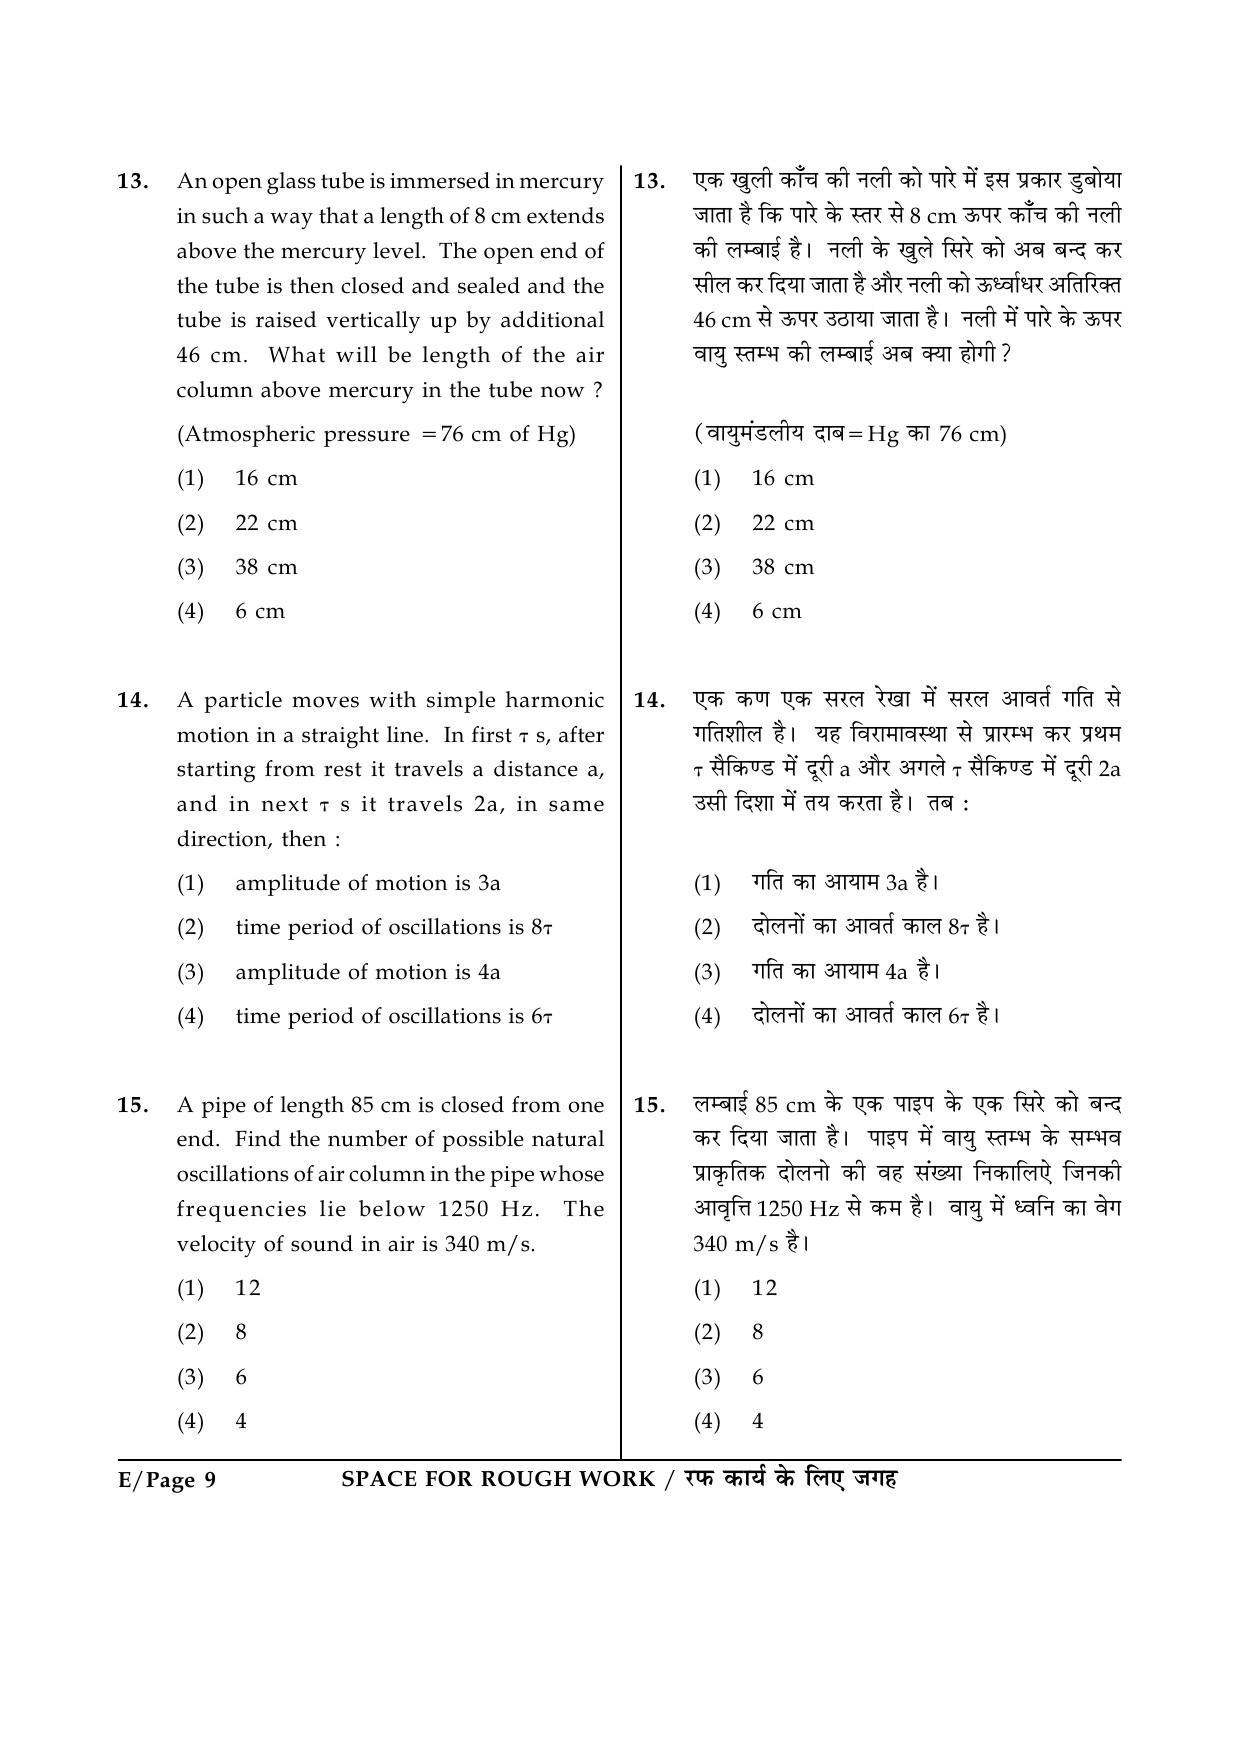 JEE Main Exam Question Paper 2014 Booklet E 9